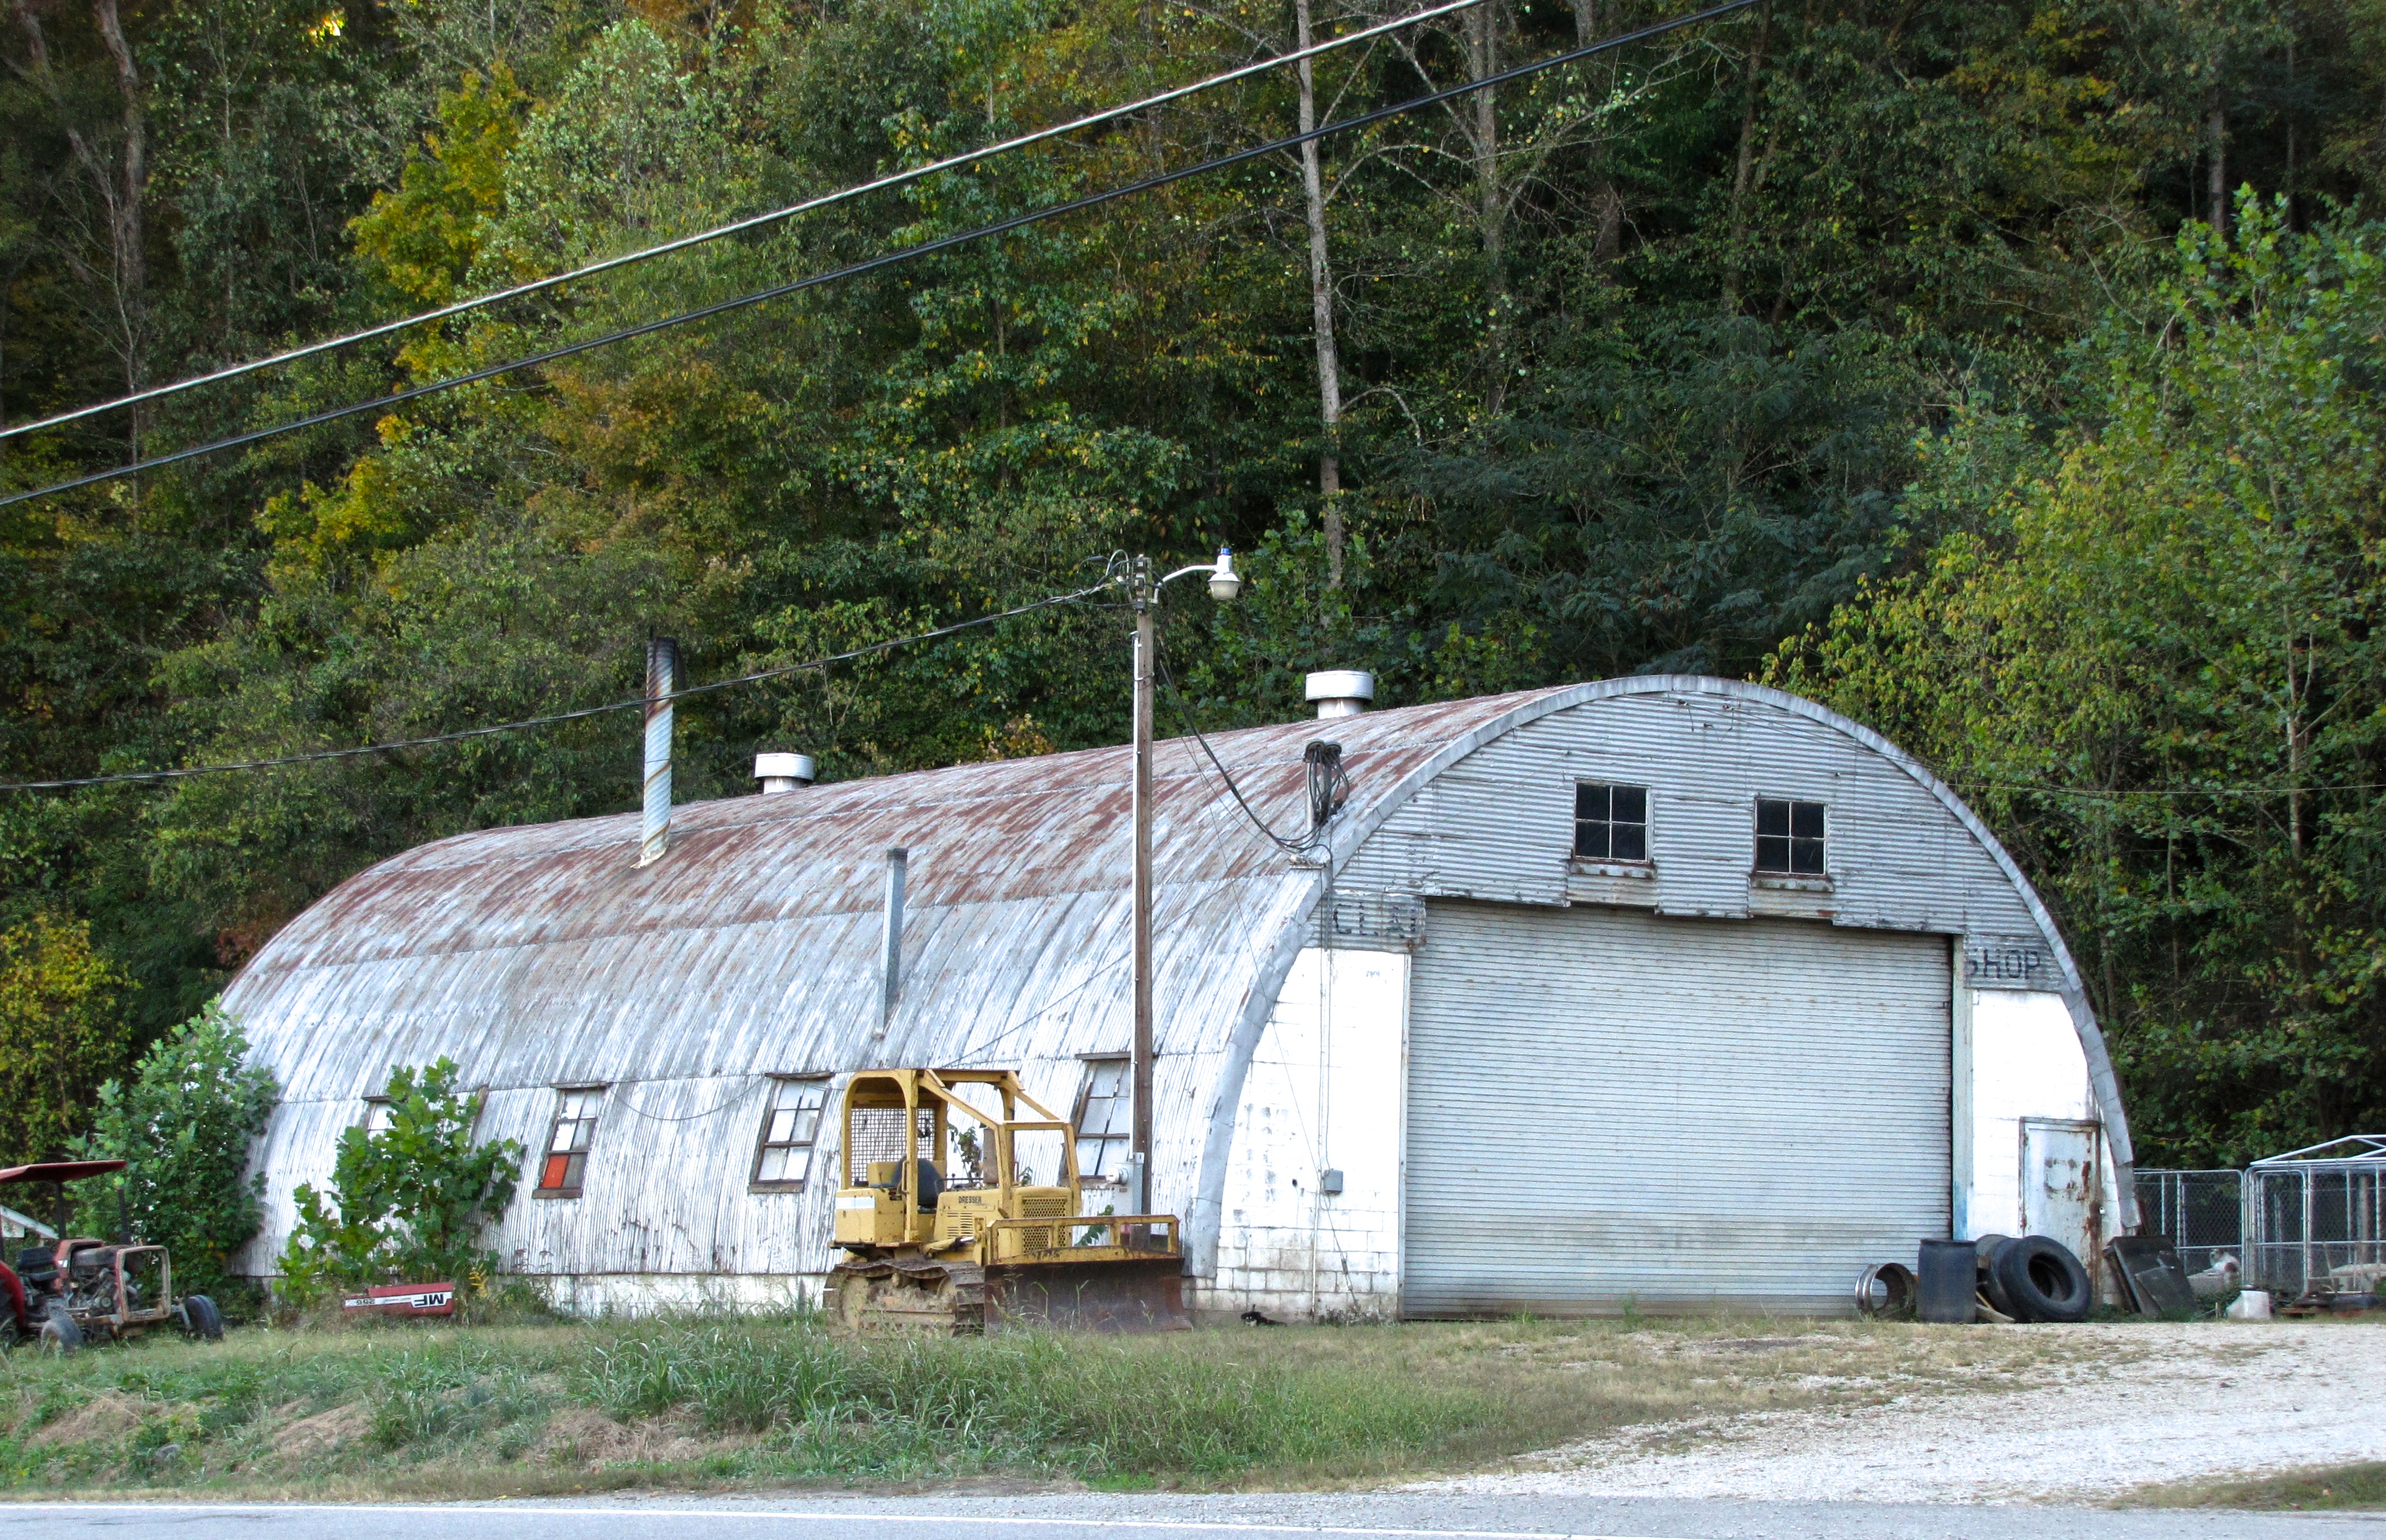 quonset hut in Bay City, TX